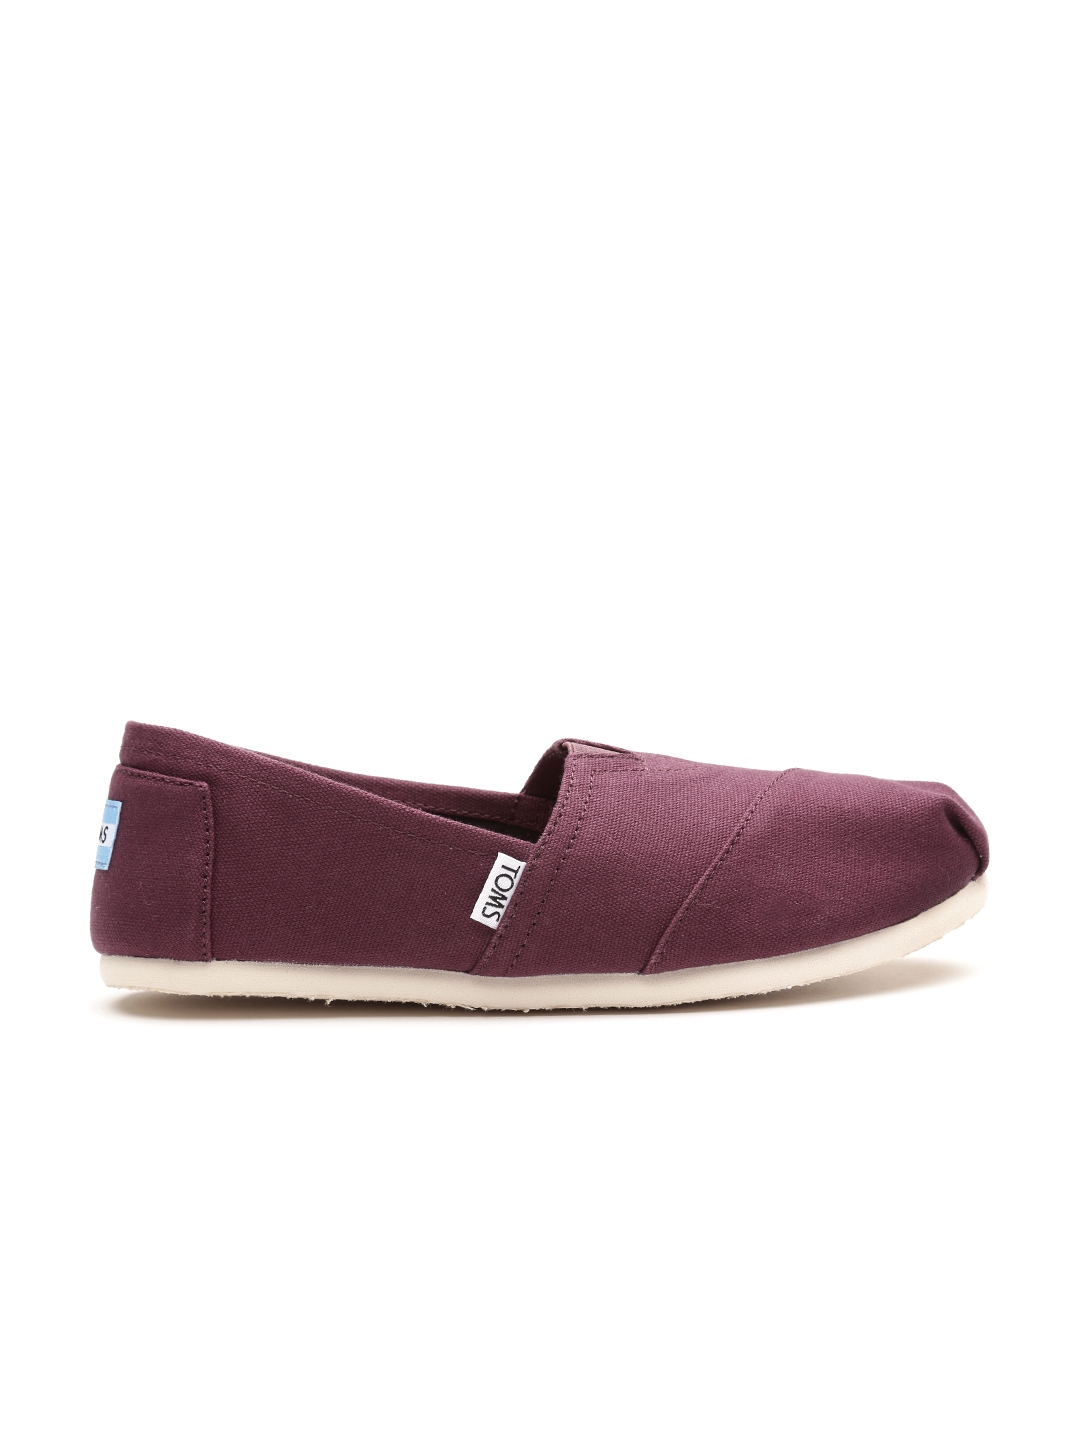 Buy TOMS Women Burgundy Slip Ons - Casual Shoes for Women 1900530 | Myntra